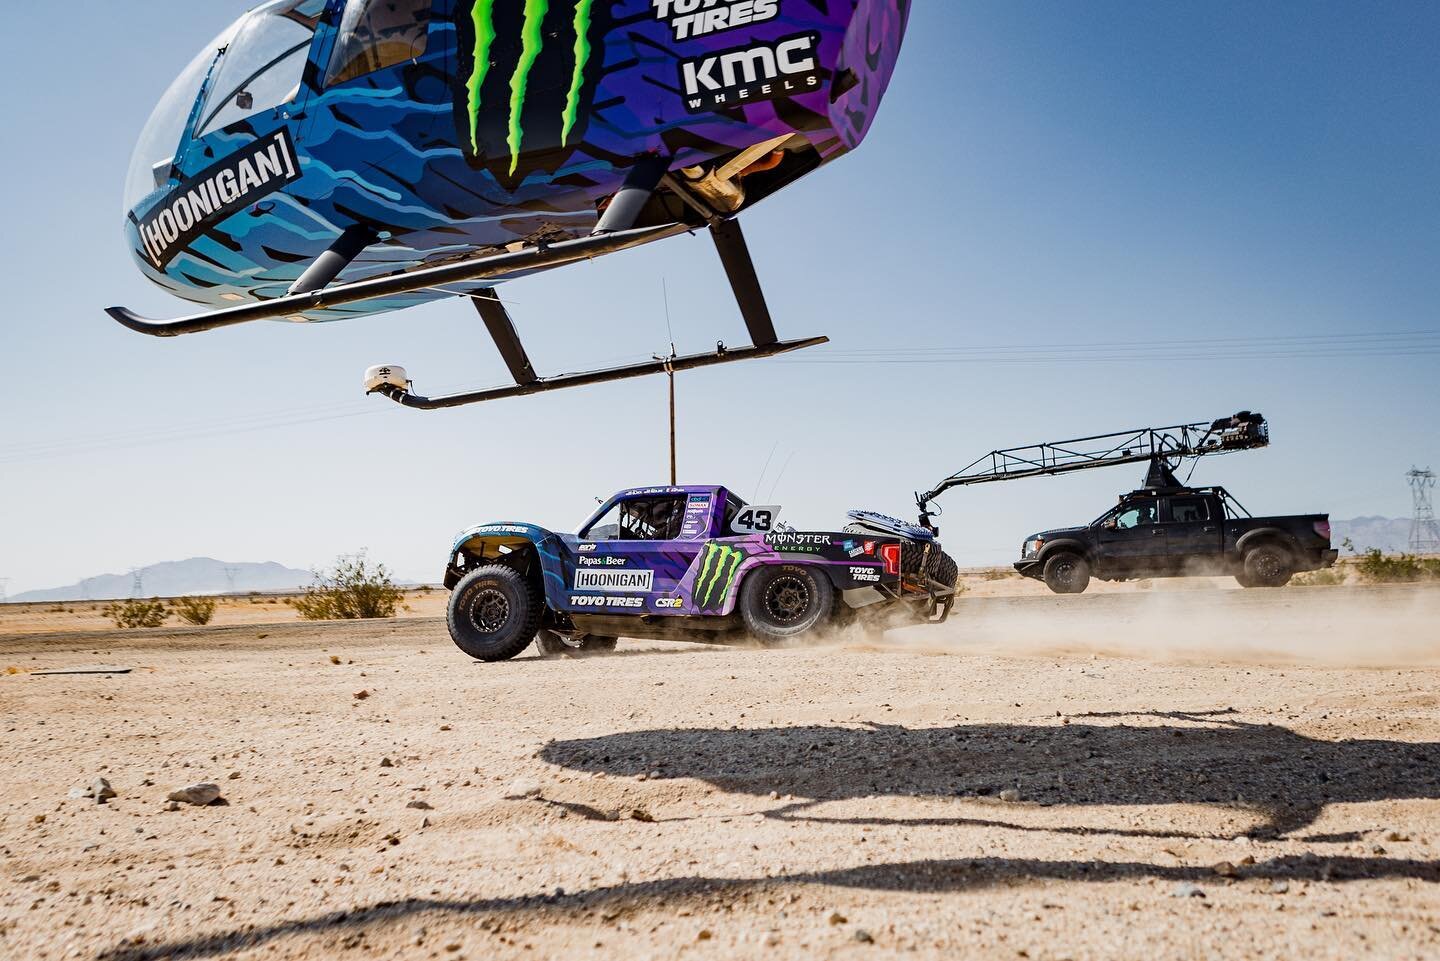 An insane day last year shooting with @temptmedia and @thehoonigans for @kblock43 journey to the Baja 1000. 

I wrote an in depth story on Tempts Raptor Camera Truck complete with their six-axis @shotoversystems . But also to help tell their story an